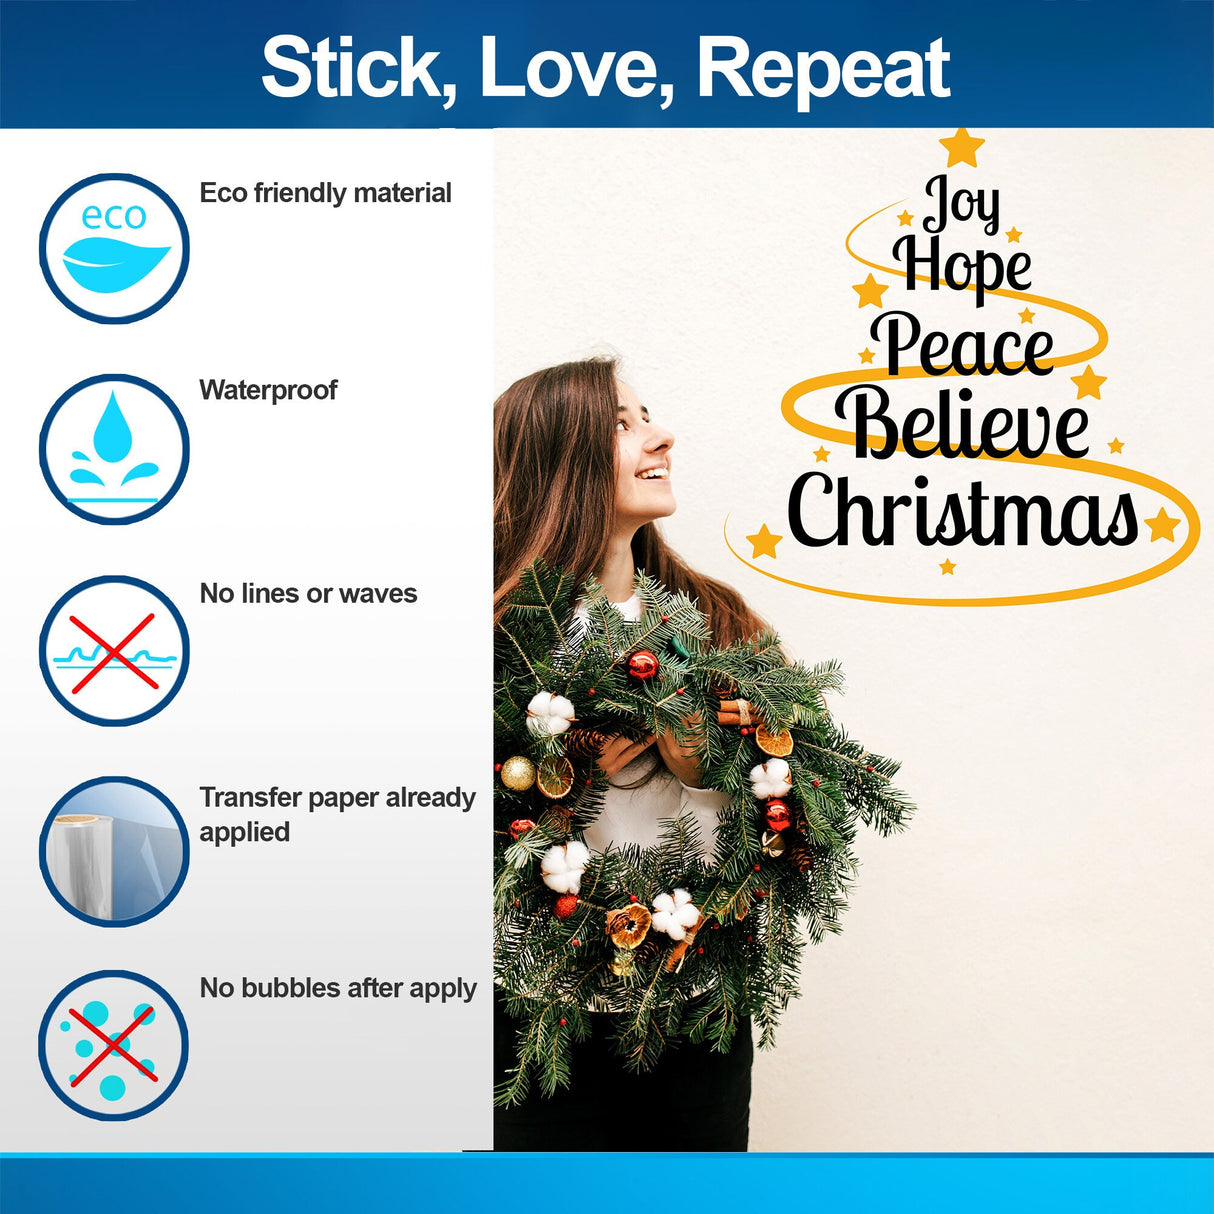 Heartwarming Christmas Quote Wall Vinyl Sticker - "Joy Hope Peace Believe Christmas" Text Decal - Inspirational Living Room Festive Sayings